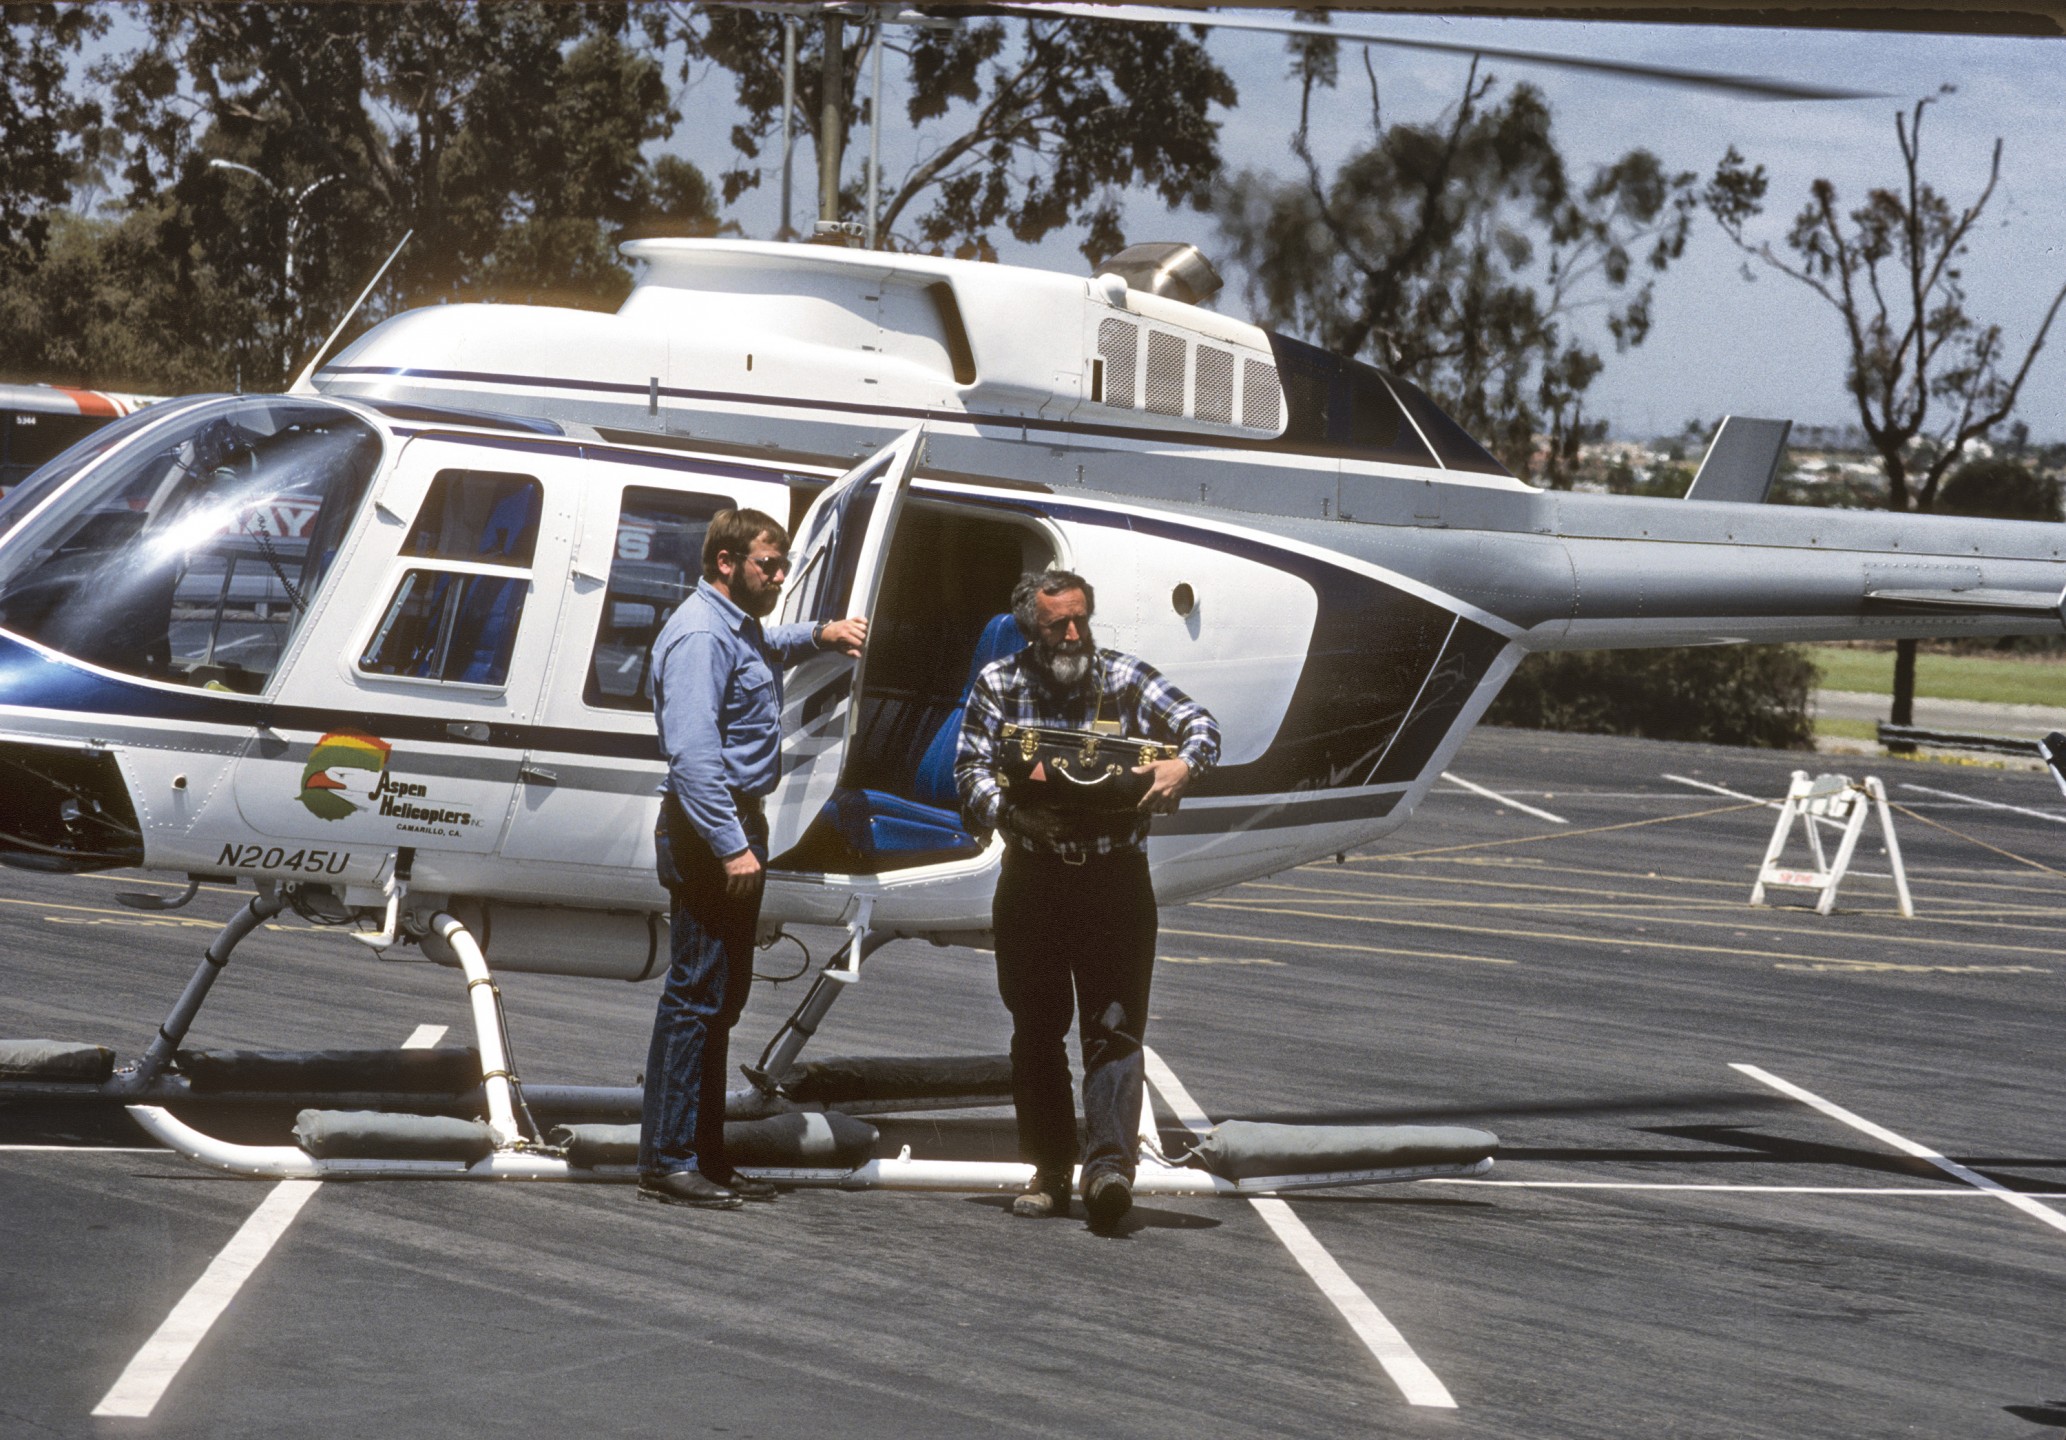 The helicopter arrives bringing a California condor egg to the San Diego Zoo's Avian Propagation Center for hatching on February 23, 1983. Noel Snyder of the U.S. Fish & Wildlife Service carries the precious cargo in a padded egg case. This event was the result of an agreement between the San Diego Zoo, the Los Angeles Zoo, the National Audubon Society, the U.S. Fish & Wildlife Service, and the California Department of Fish & Game to remove eggs from the five known pairs of California condors left in the wild and bring them to zoos for hatching and raising.